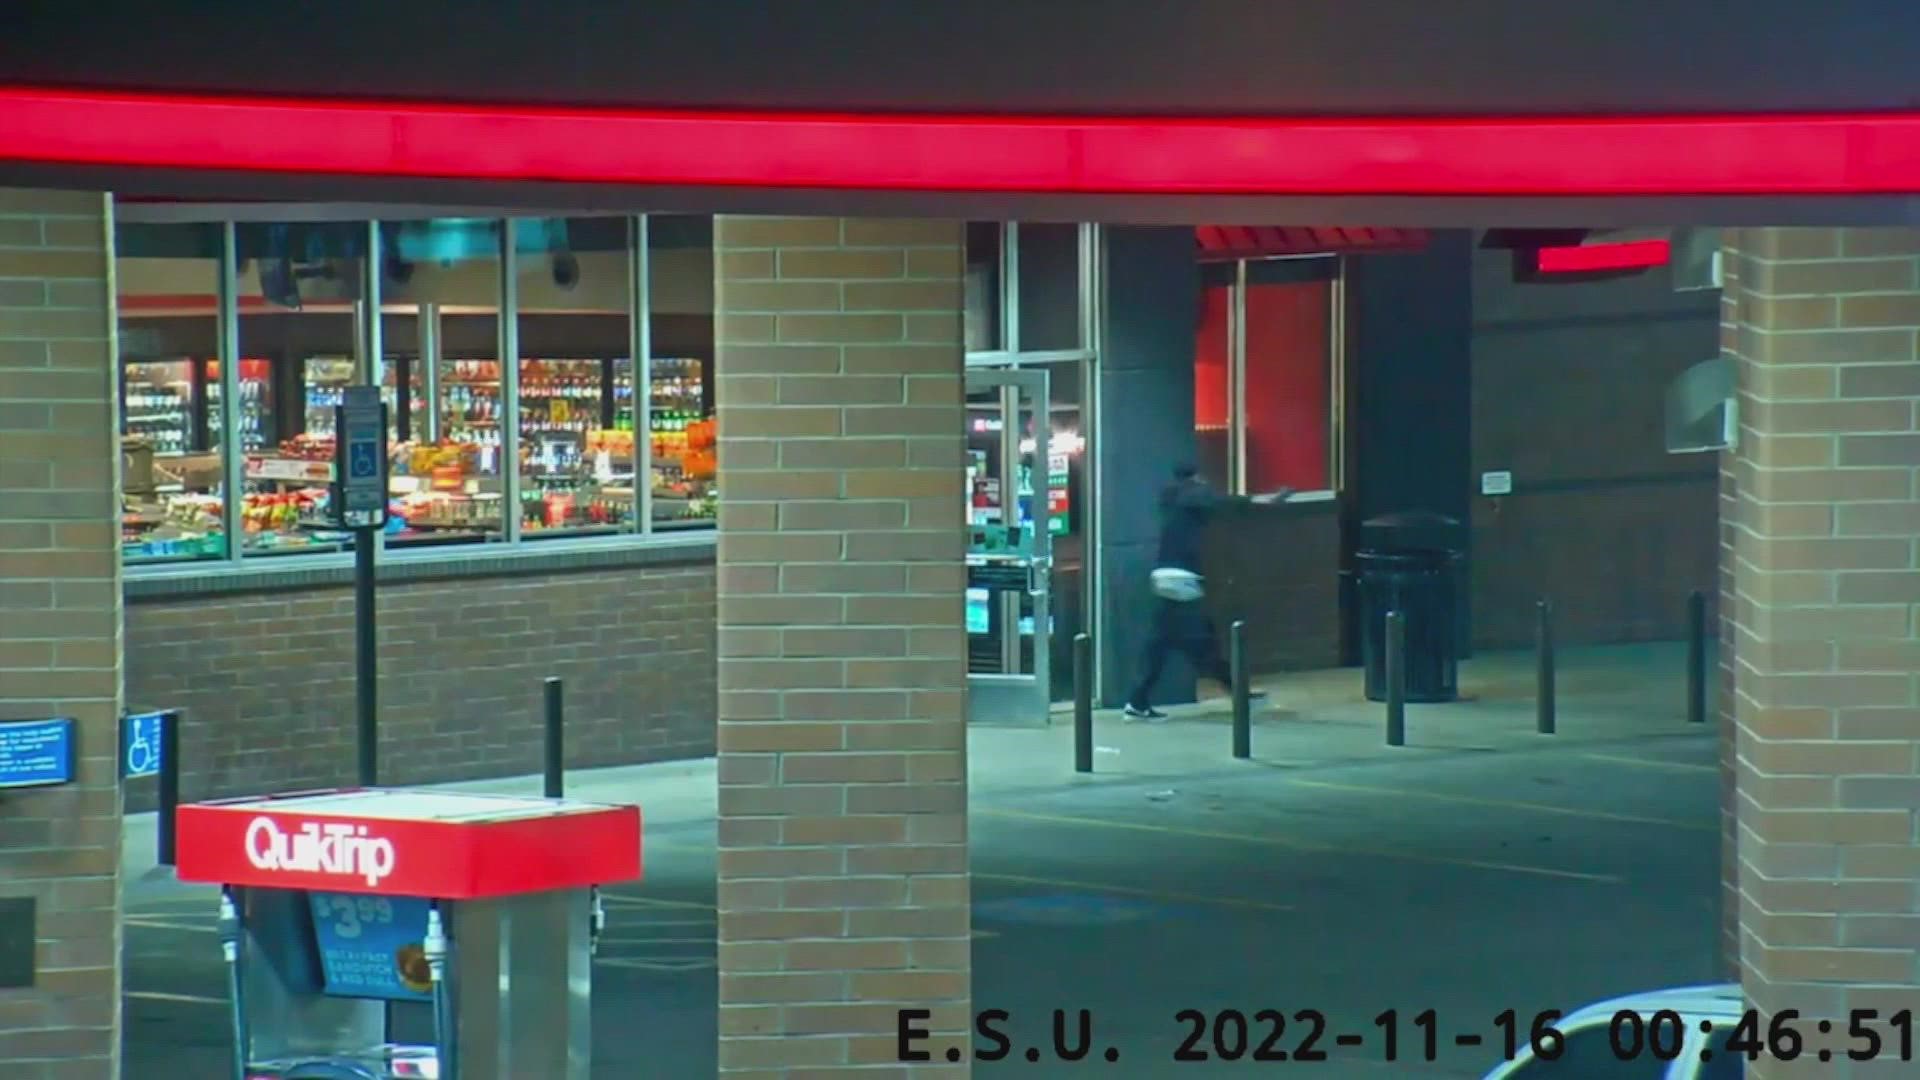 The 31-year-old man called his wife while waiting for officers to arrive at a QuikTrip gas station. His wife said he apologized to her and then she heard gunshots.